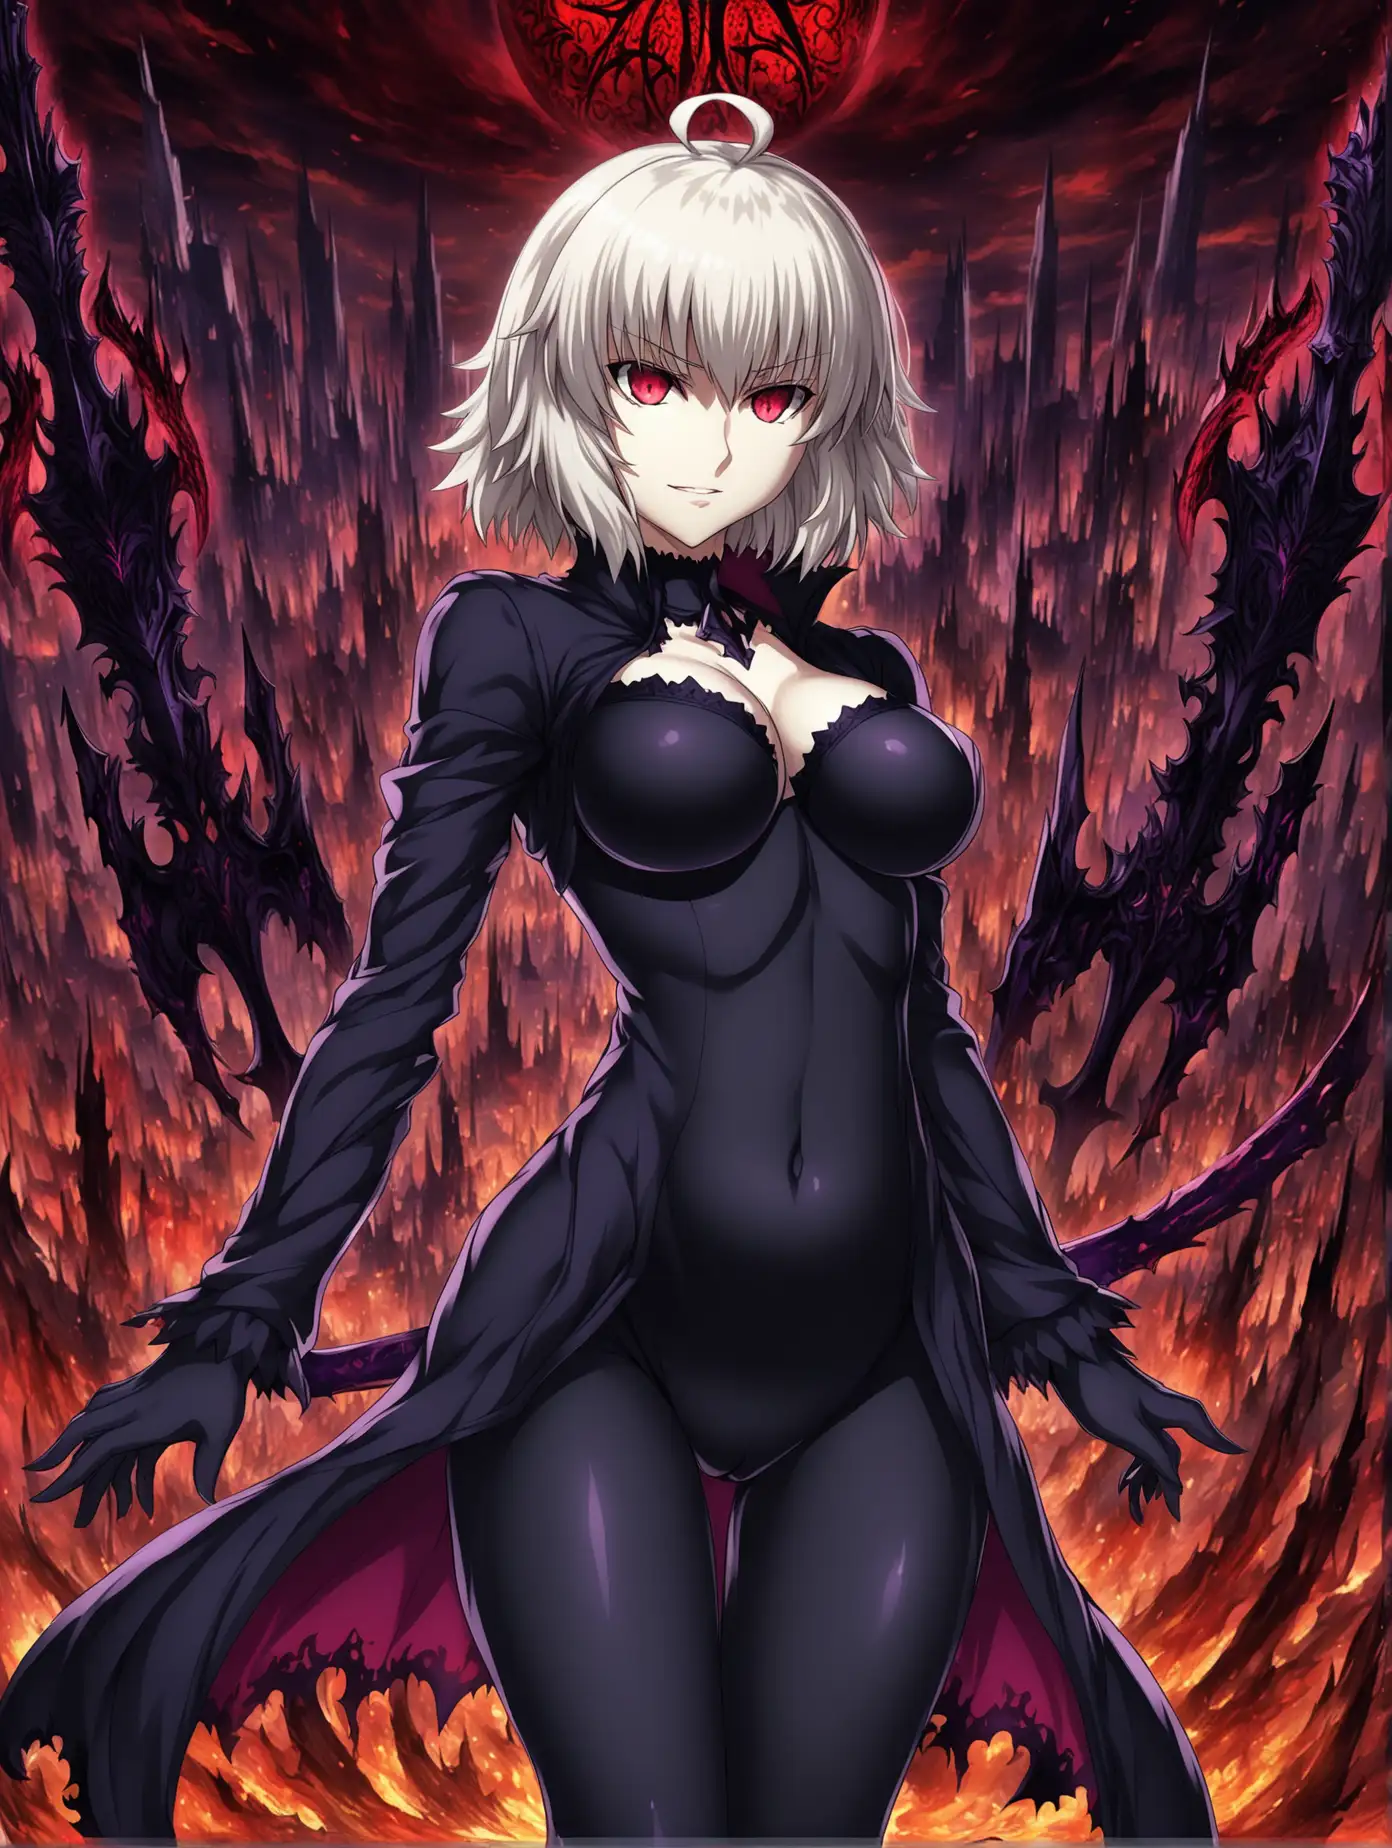 Jeanne-Alter-from-Fate-Exquisite-Portrait-of-the-Alluring-Heroine